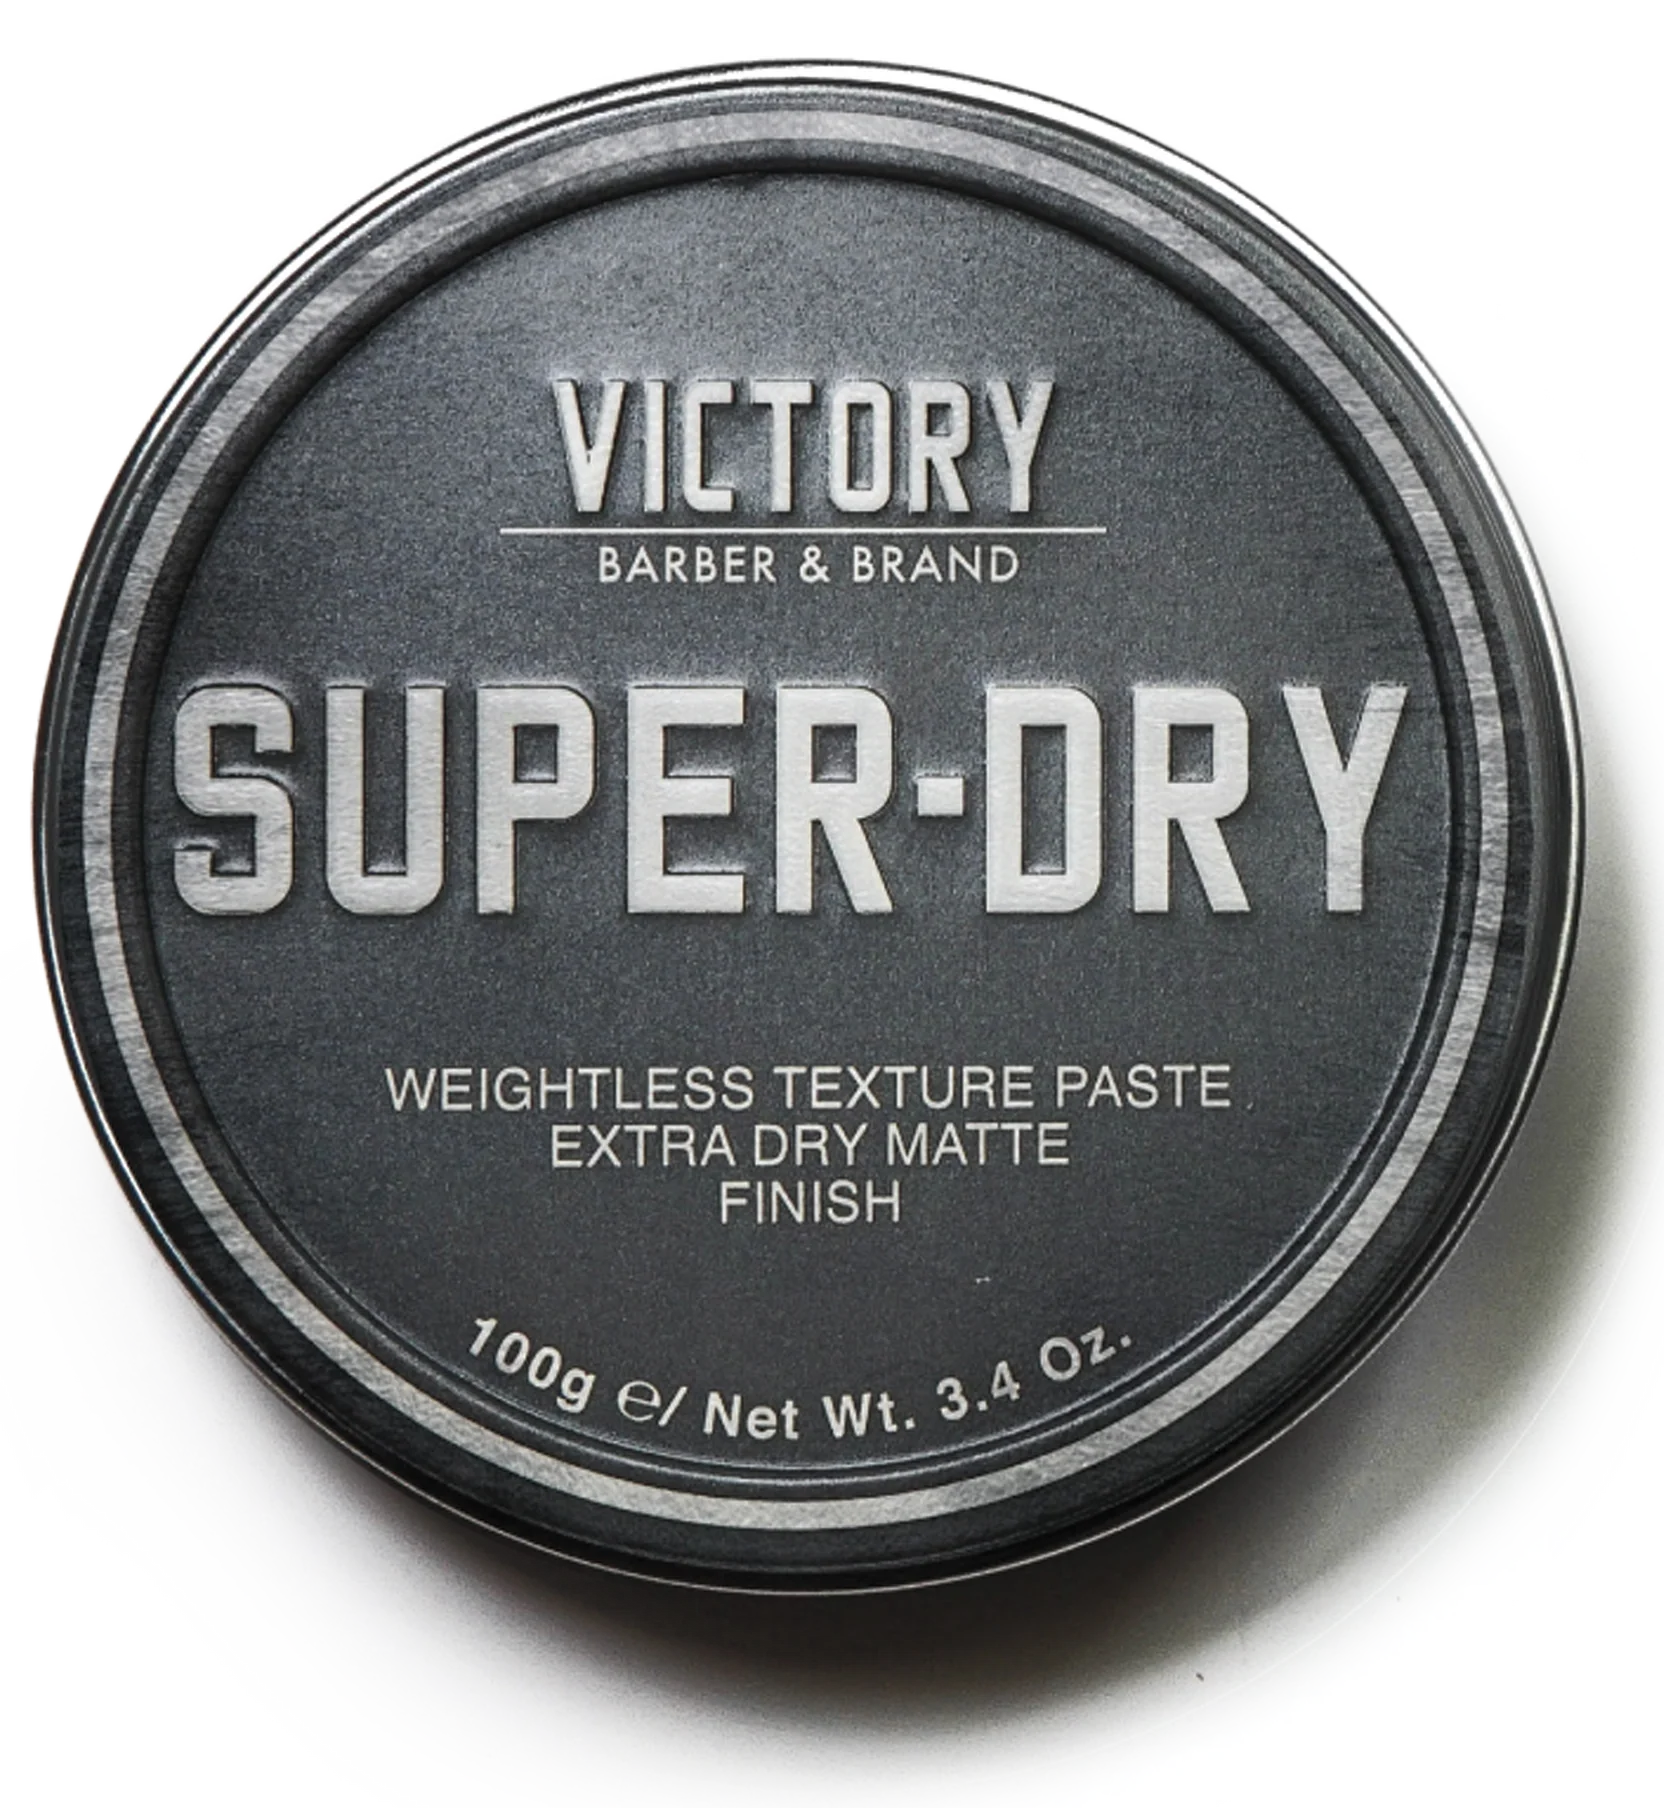 Victory Super-Dry Weightless Texture Paste Extra Dry Matte Finish